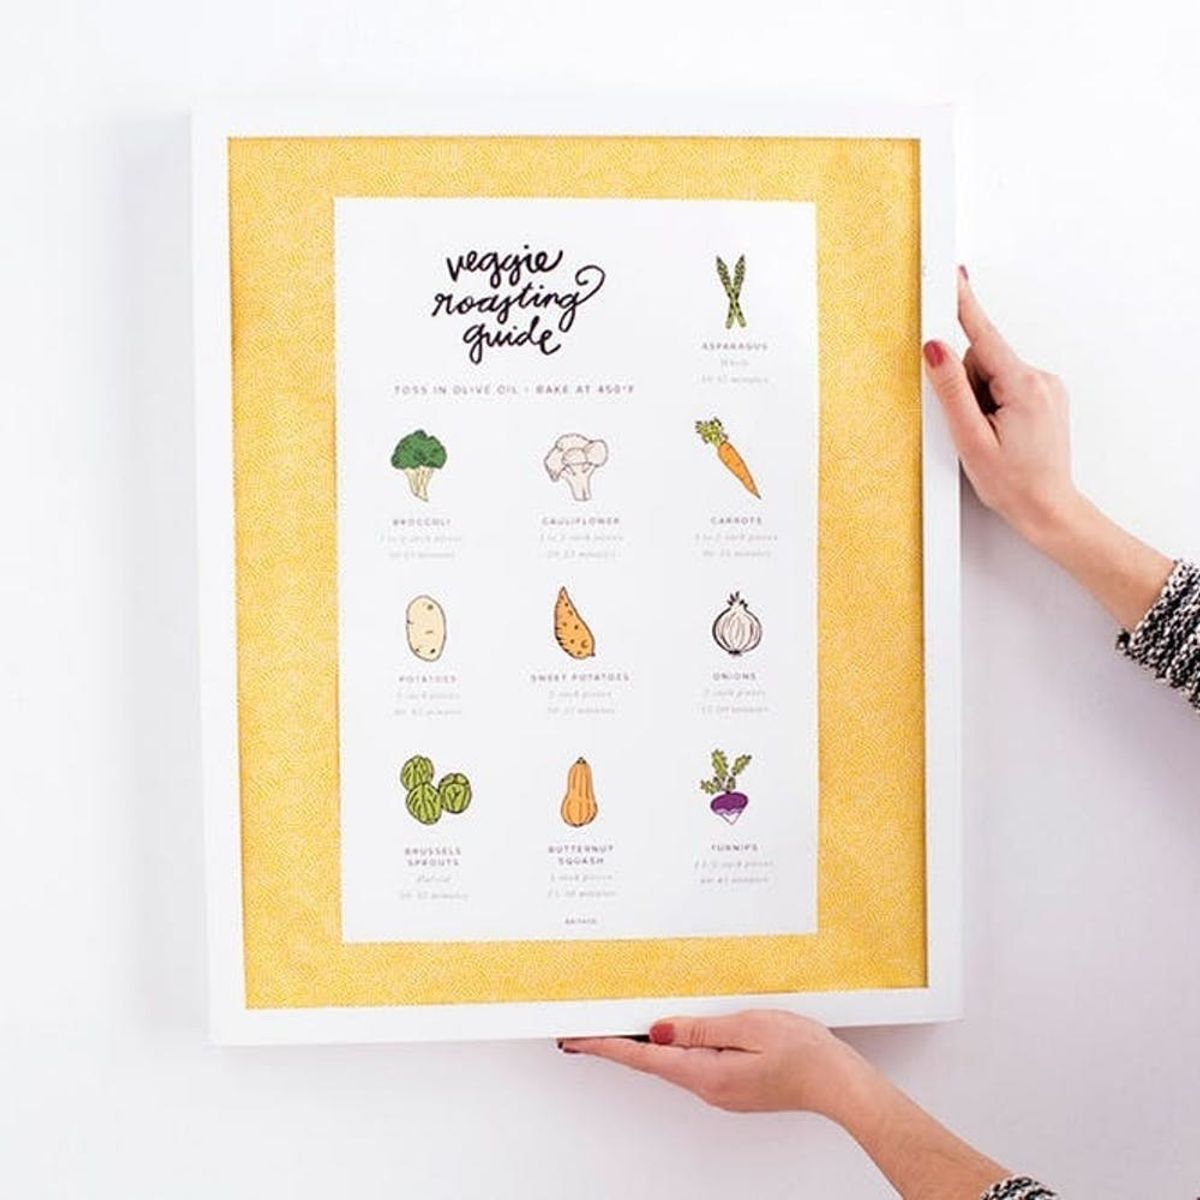 14 (Free!) Printables for Your Gallery Wall